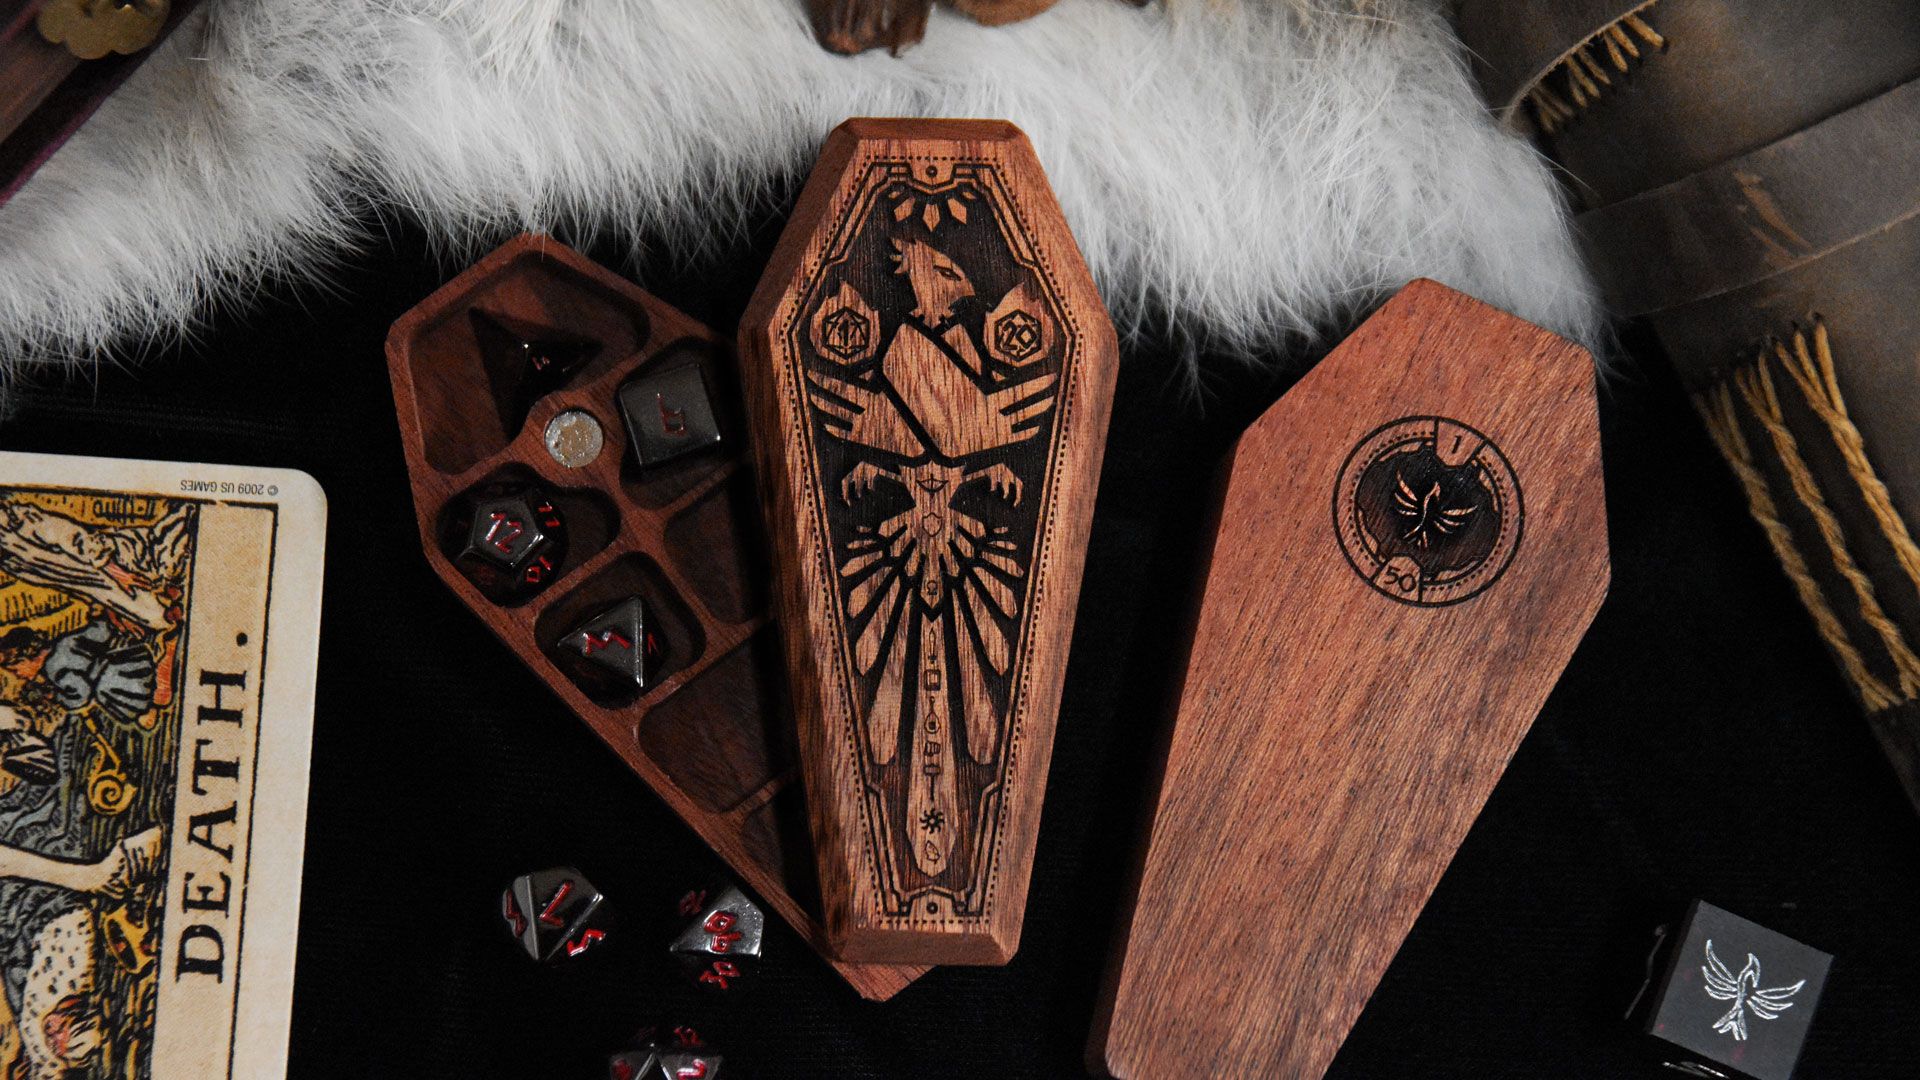 Limited Edition Mini Sarcophagi shaped dice boxes made of wood, holding a set of RPG dice